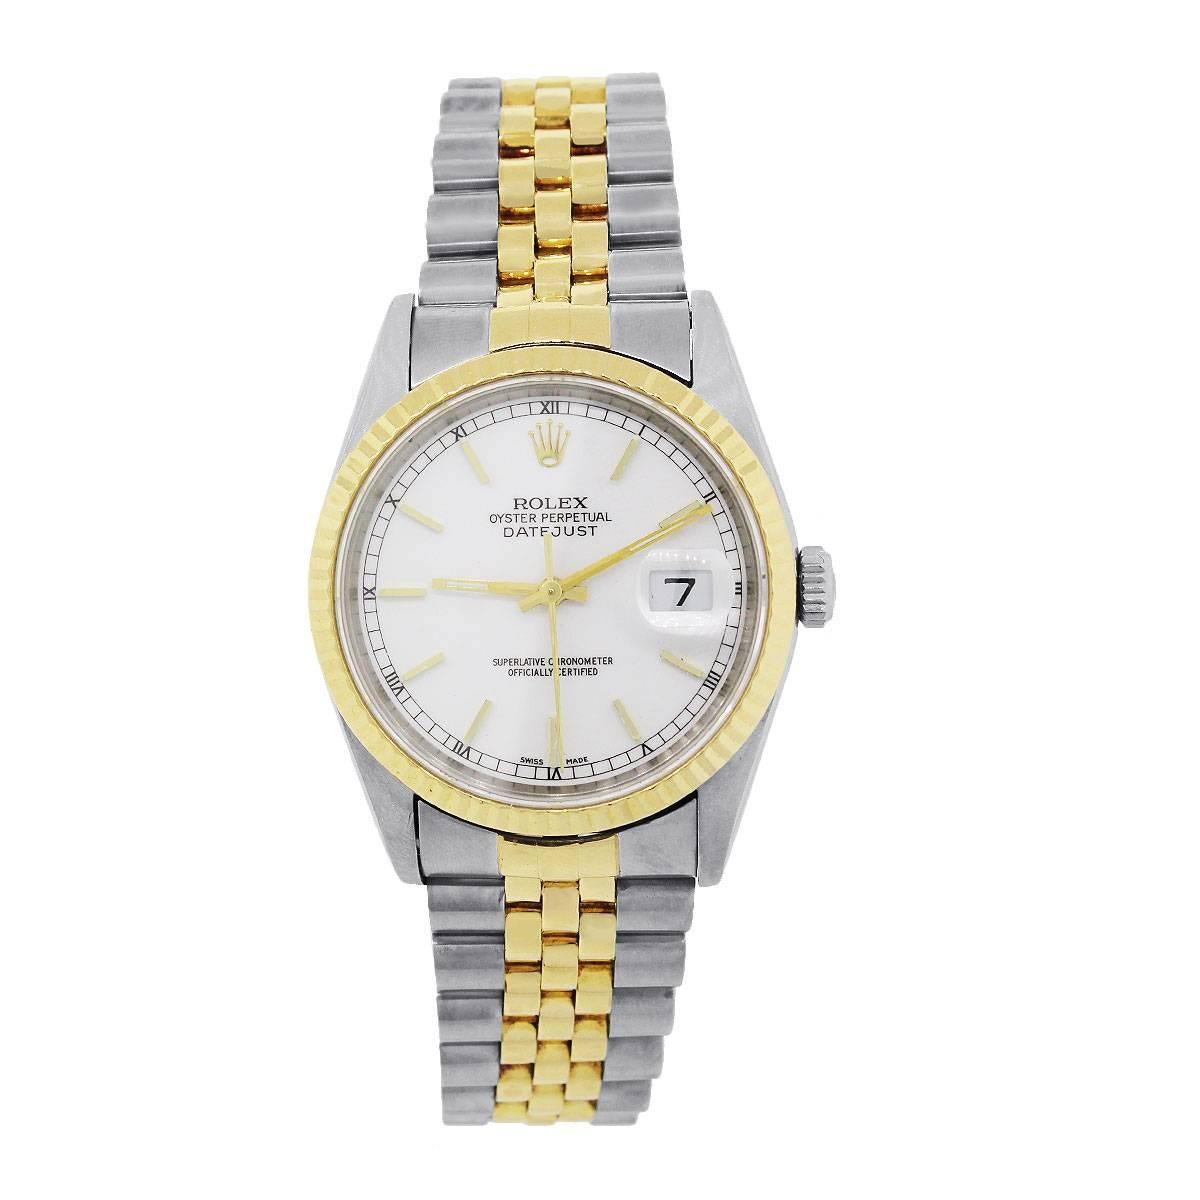 Brand: Rolex
MPN: 16233
Model: Datejust
Case Material: Stainless Steel and 18k Yellow Gold
Case Diameter: 36mm
Crystal: Scratch resistant sapphire
Bezel: 18k Yellow Gold fluted bezel (factory)
Dial: White dial with gold stick dial markers ; Date at